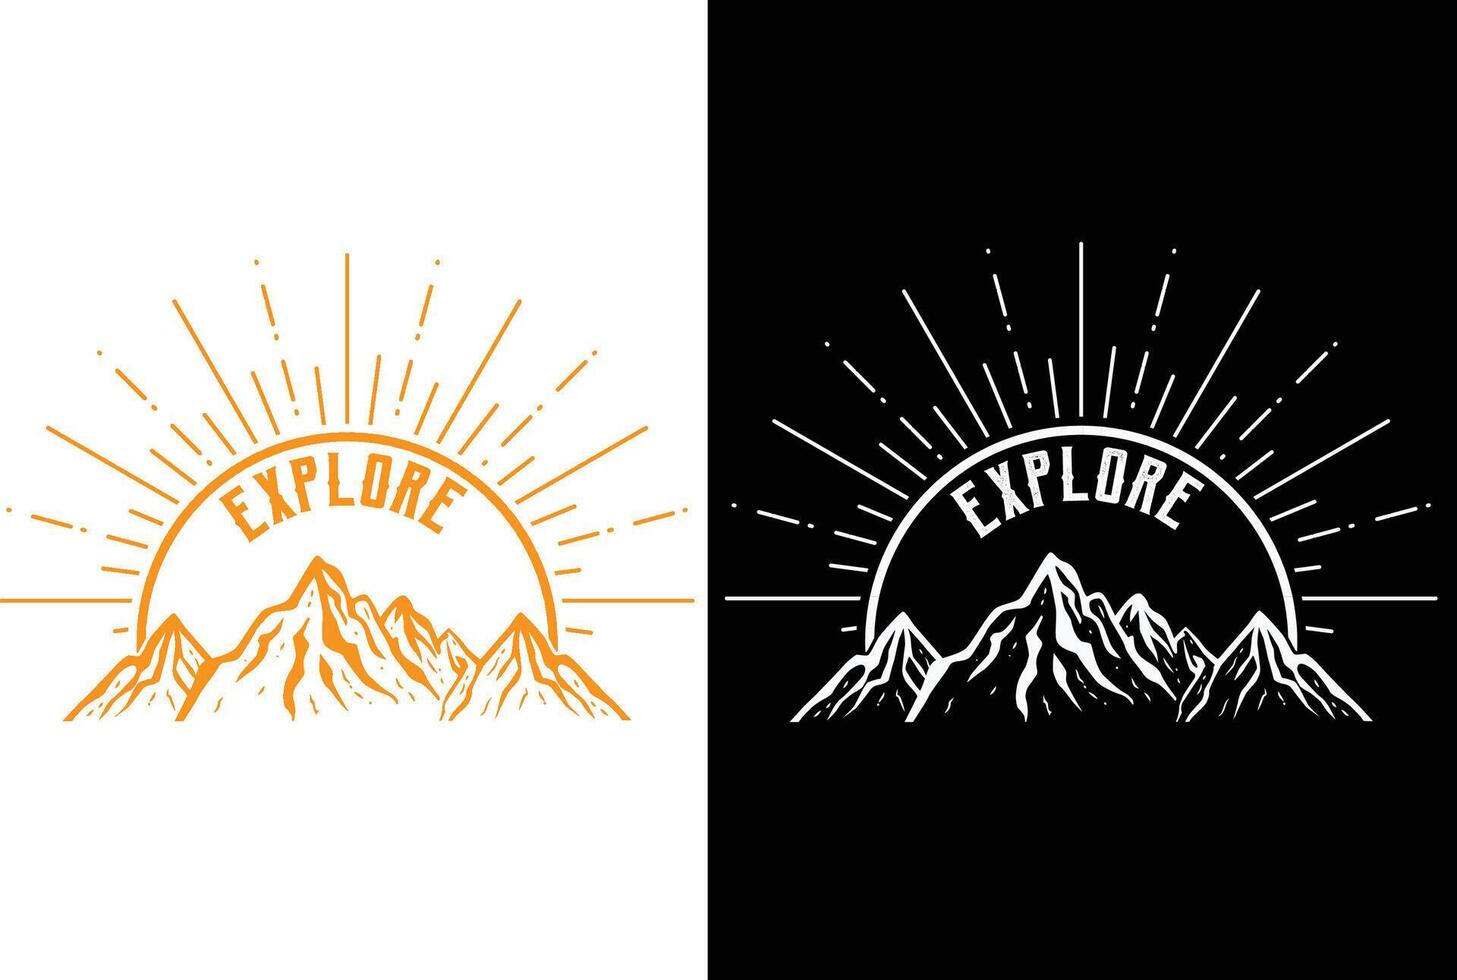 Mountain illustration, outdoor adventure . graphic for t shirt and other uses. vector